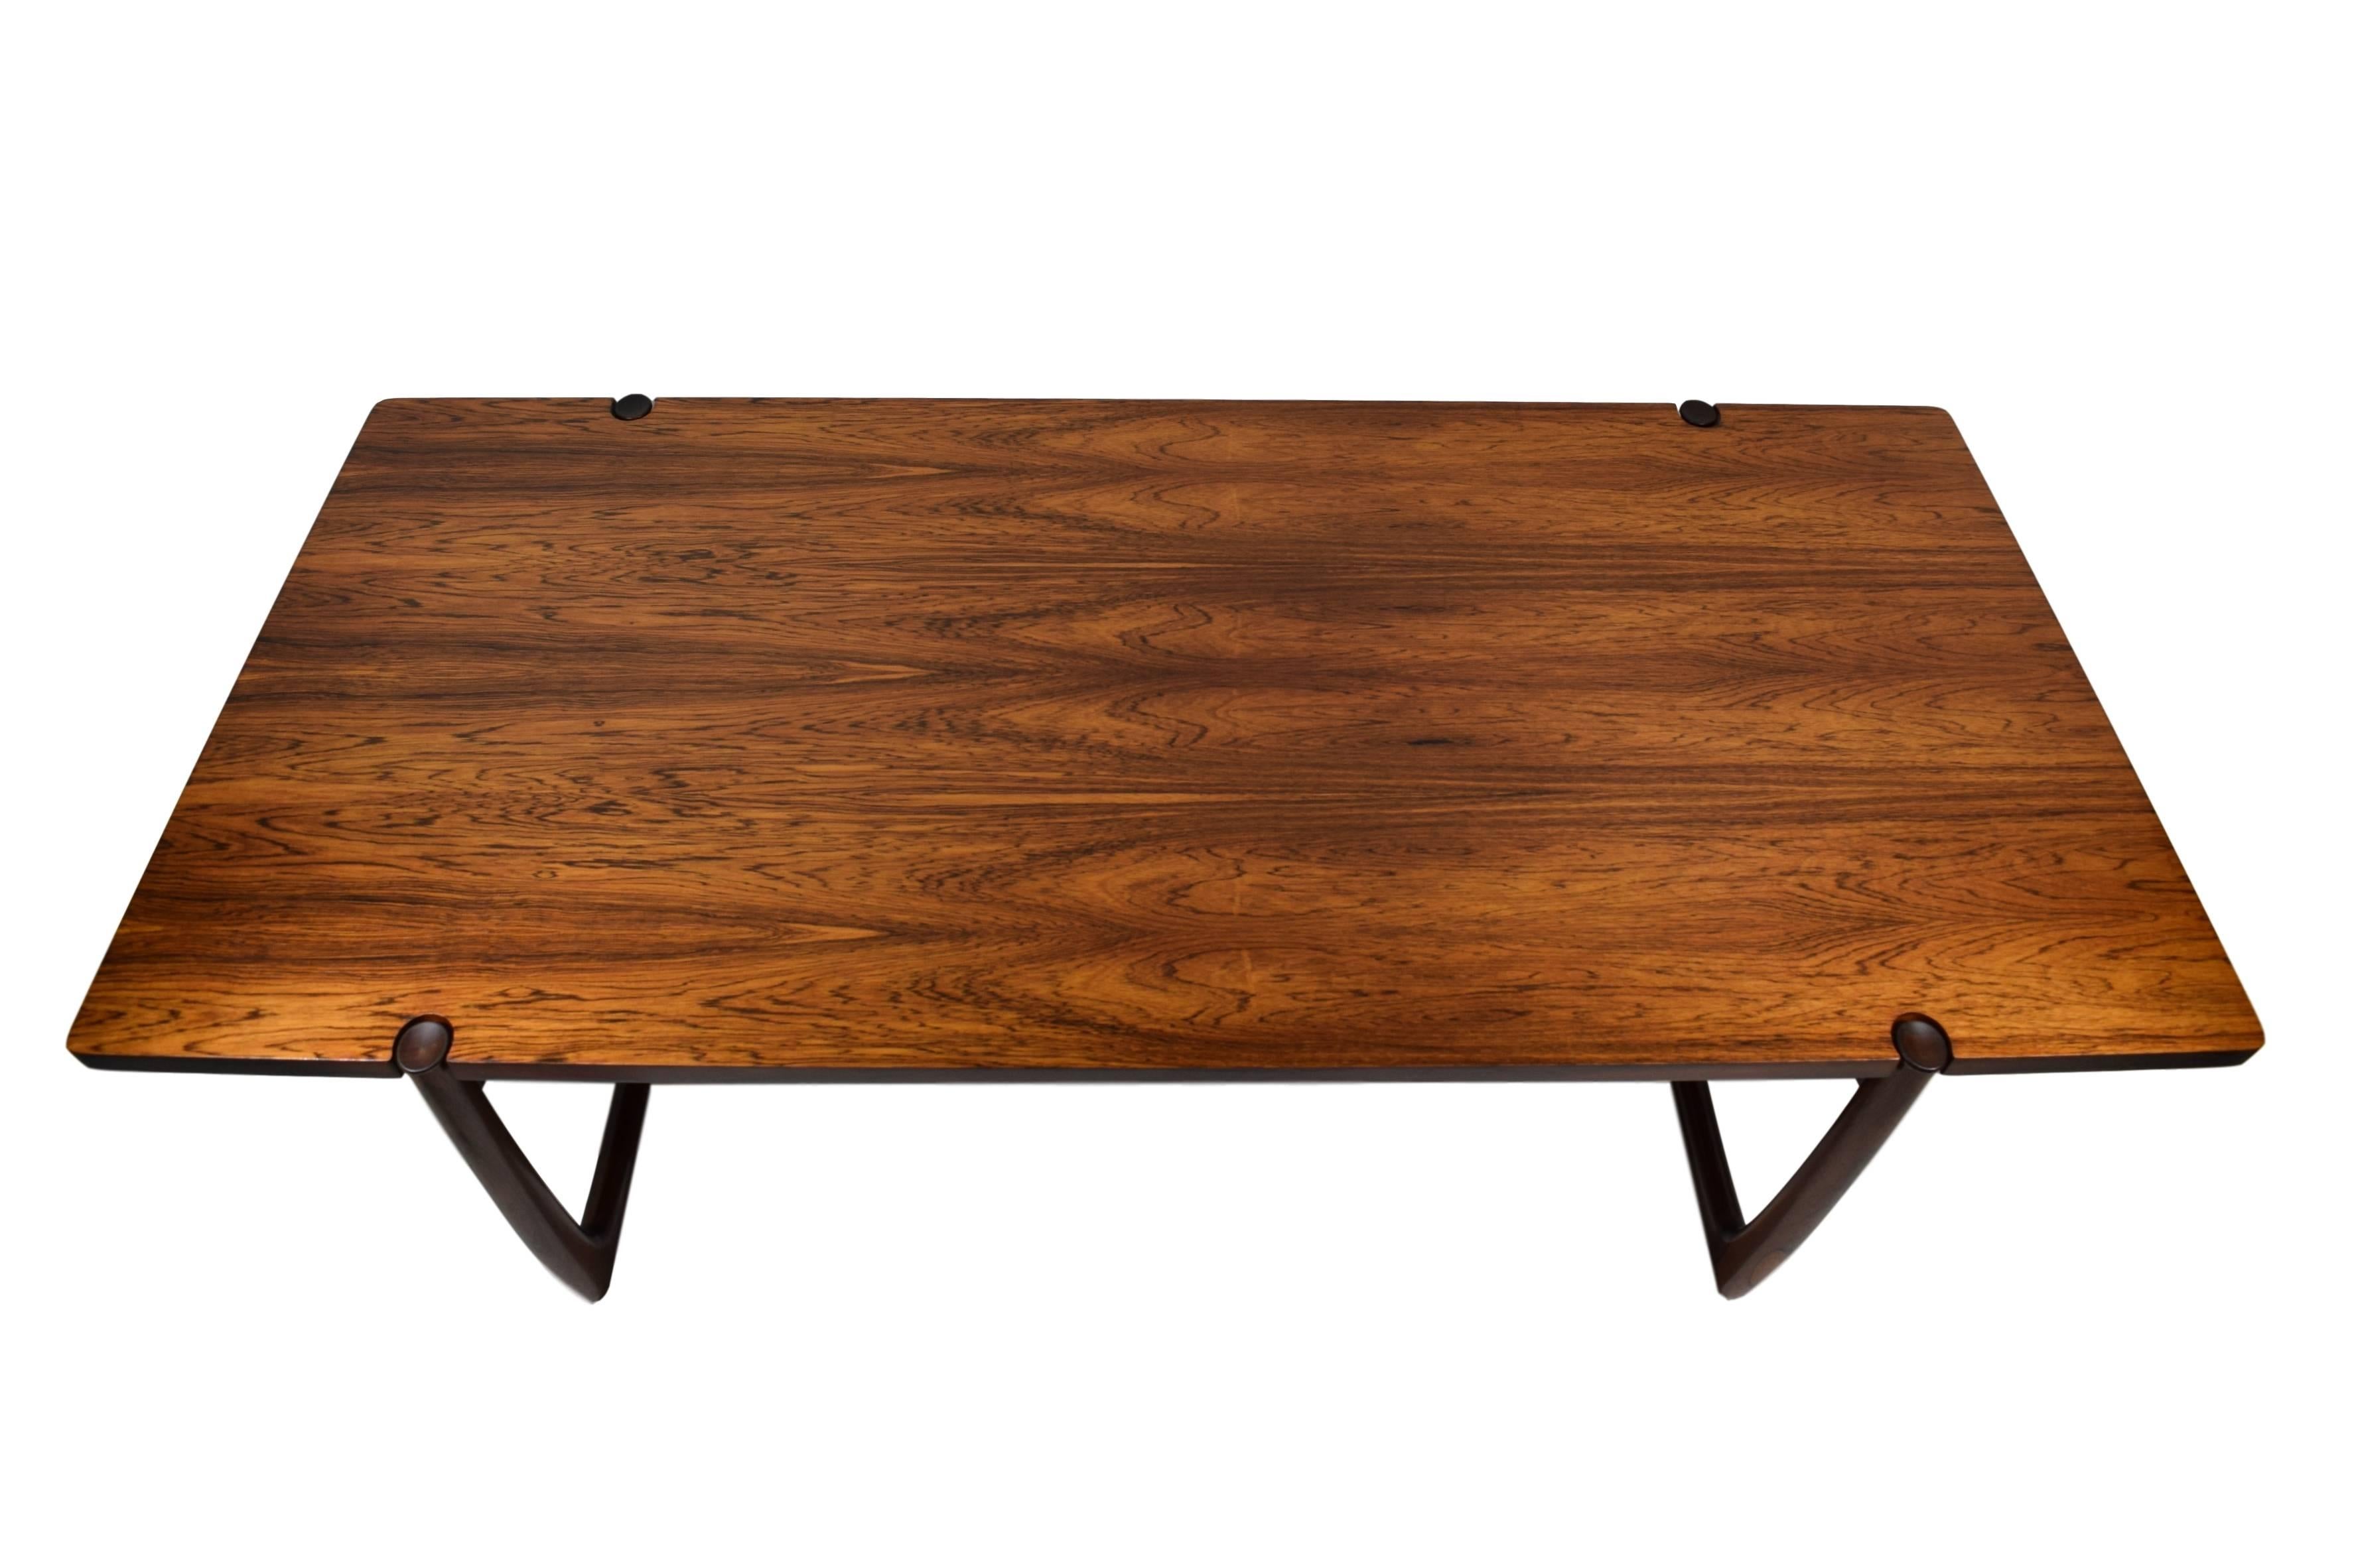 A Danish midcentury rosewood coffee table by Peter Hvidt (1916-1986) & Orla Mølgaard (1907-1993). Model 596. Produced by France & Son. Rosewood veneer and solid rosewood legs. The table is newly refinished and has expressive rosewood grains.